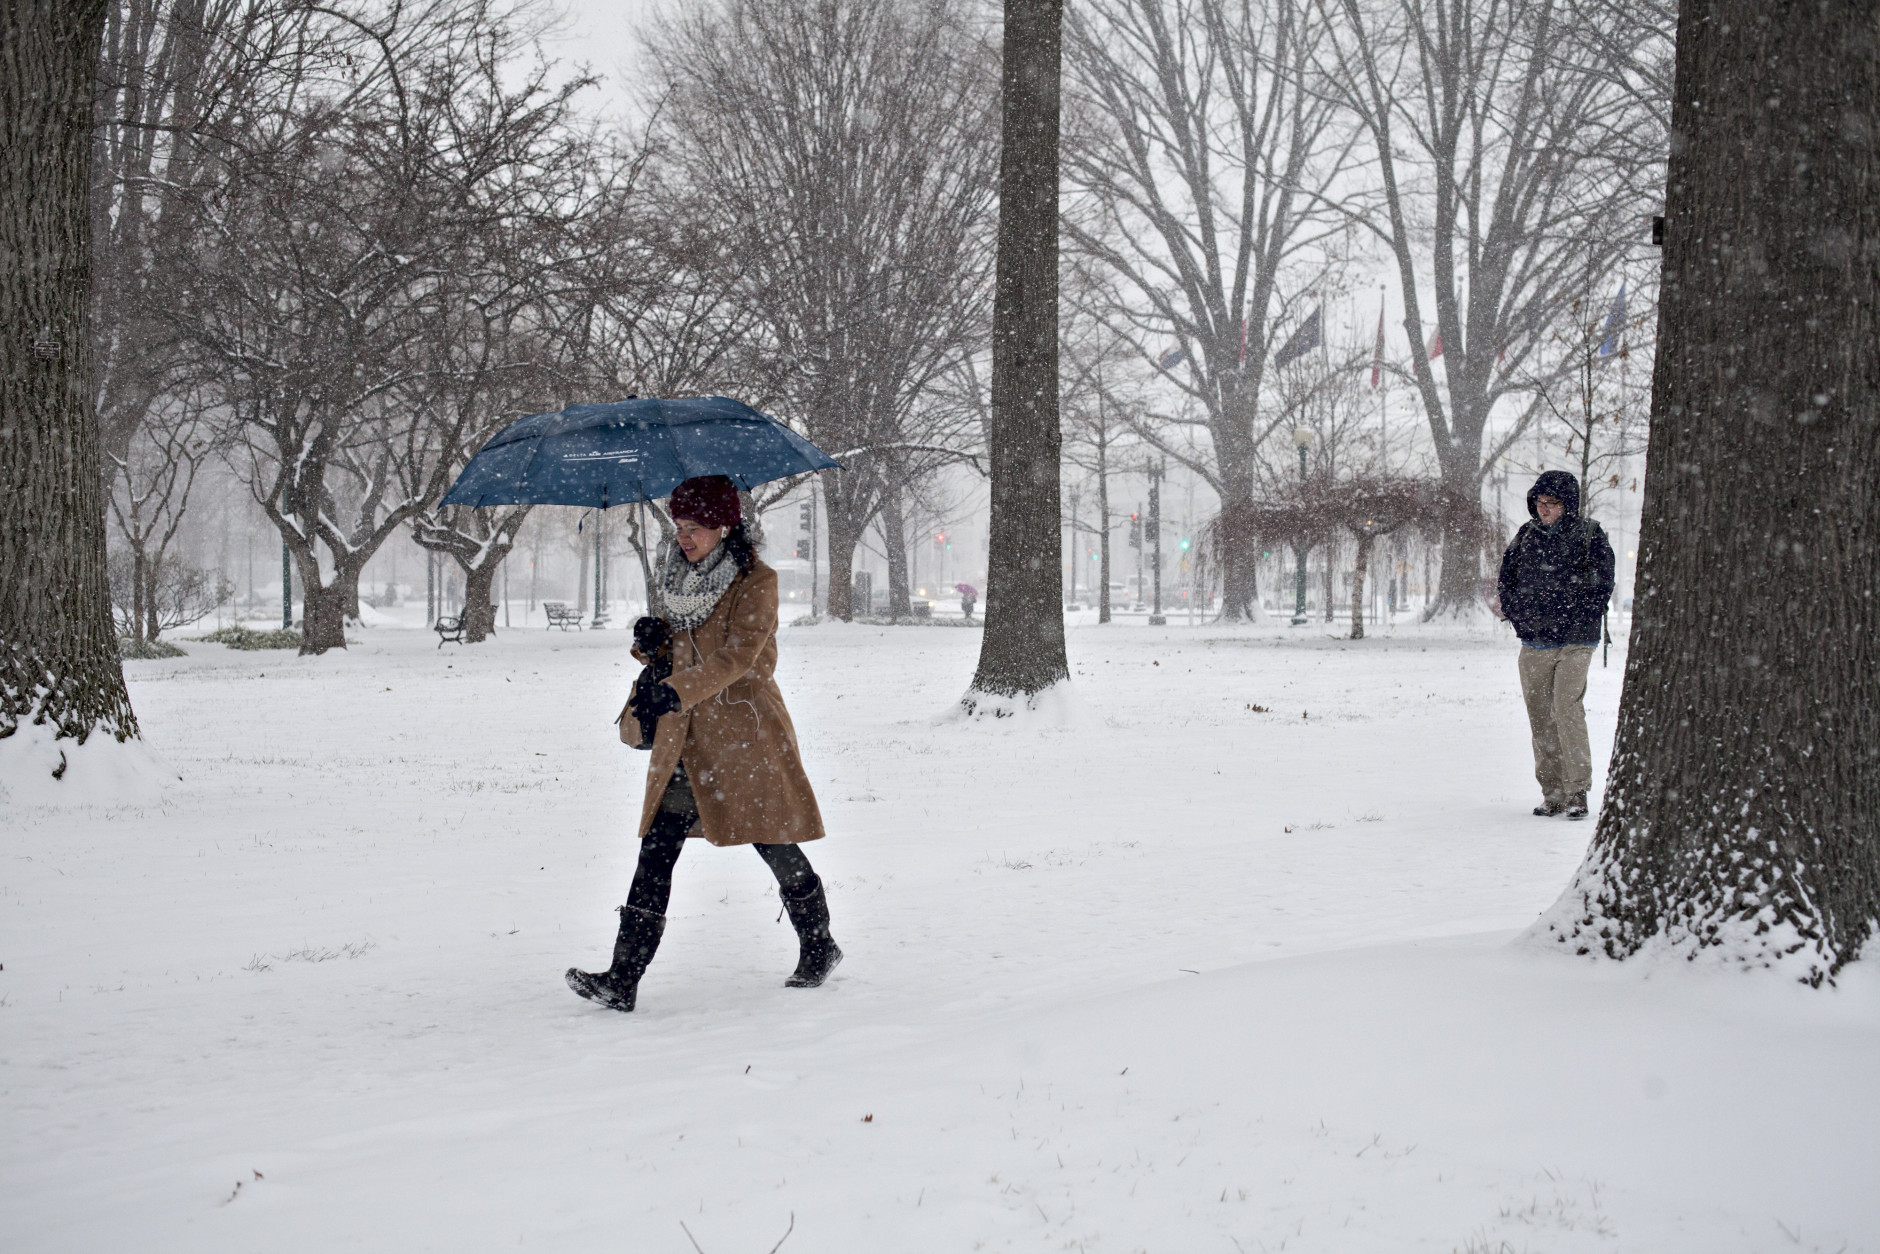 People make their way to work on Capitol Hill in Washington during the first snowfall of the year and the opening day for the 114th Congress, Tuesday, Jan. 6, 2015. Snow and cold air are causing school closures and delays as well as bringing traffic to a crawl around the region.   (AP Photo/J. Scott Applewhite)